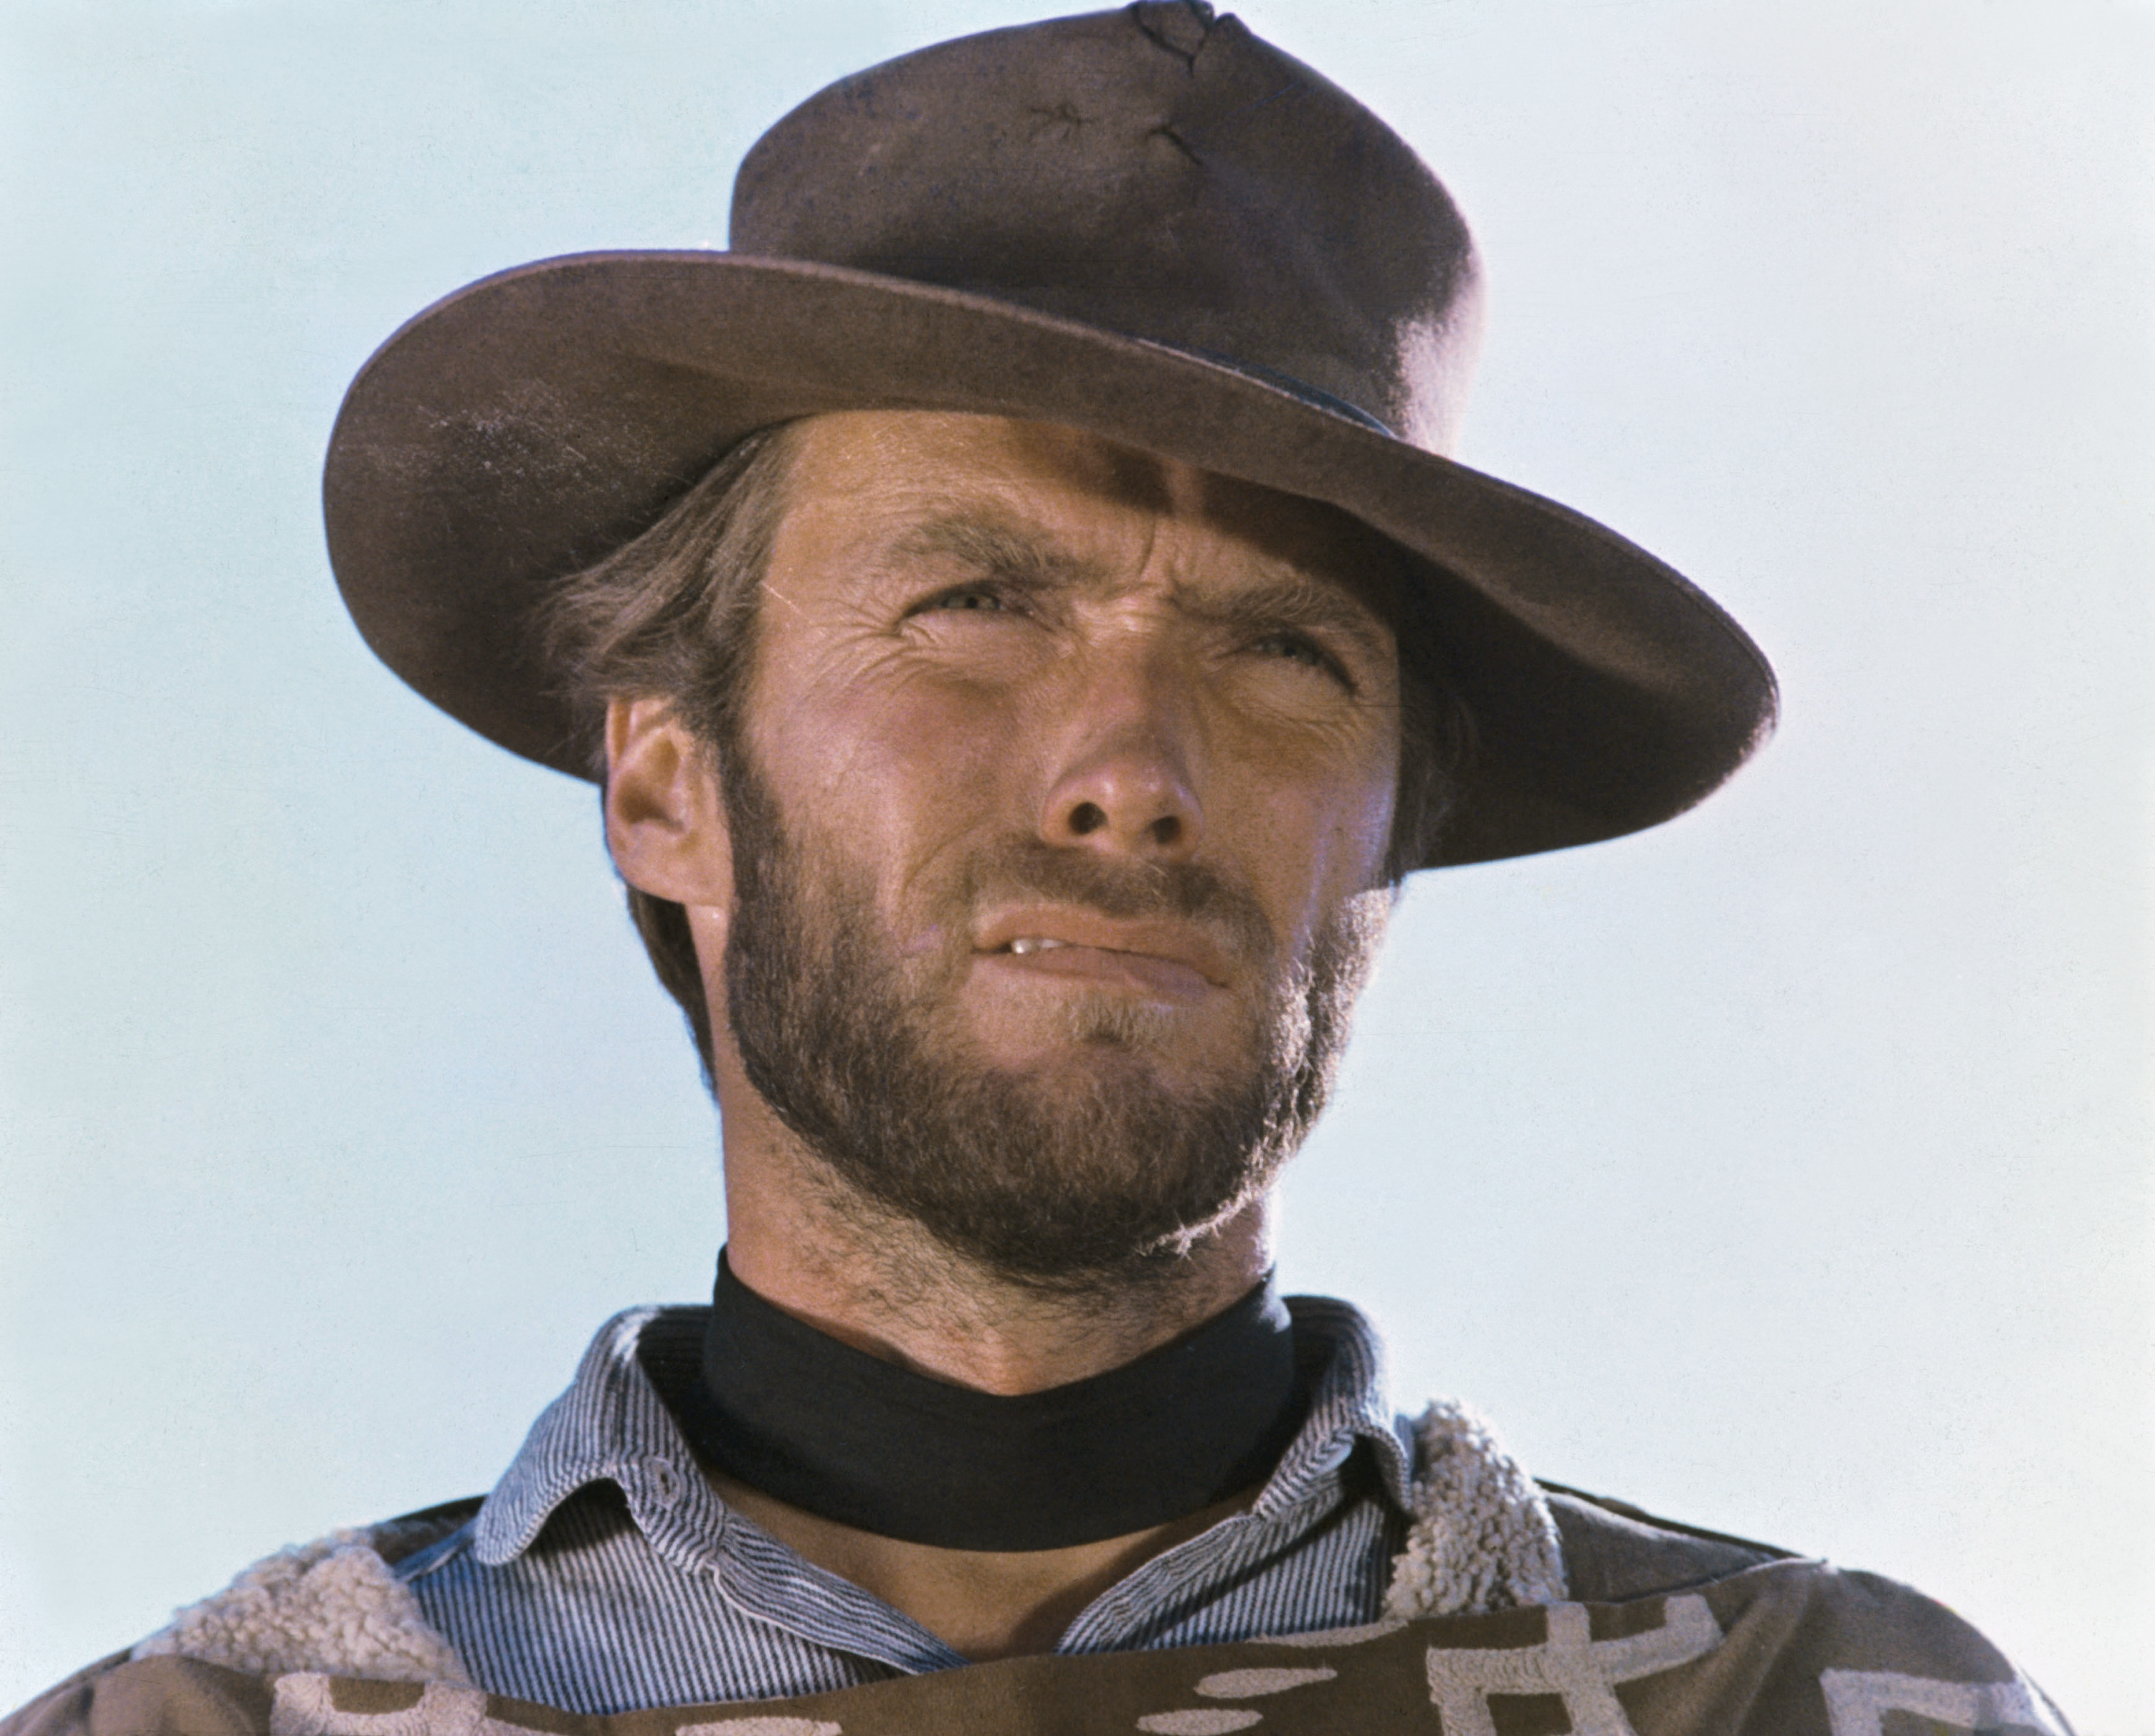 Clint Eastwood in a scene from "The Good, The Bad and The Ugly" in 1966. | Source: Getty Images